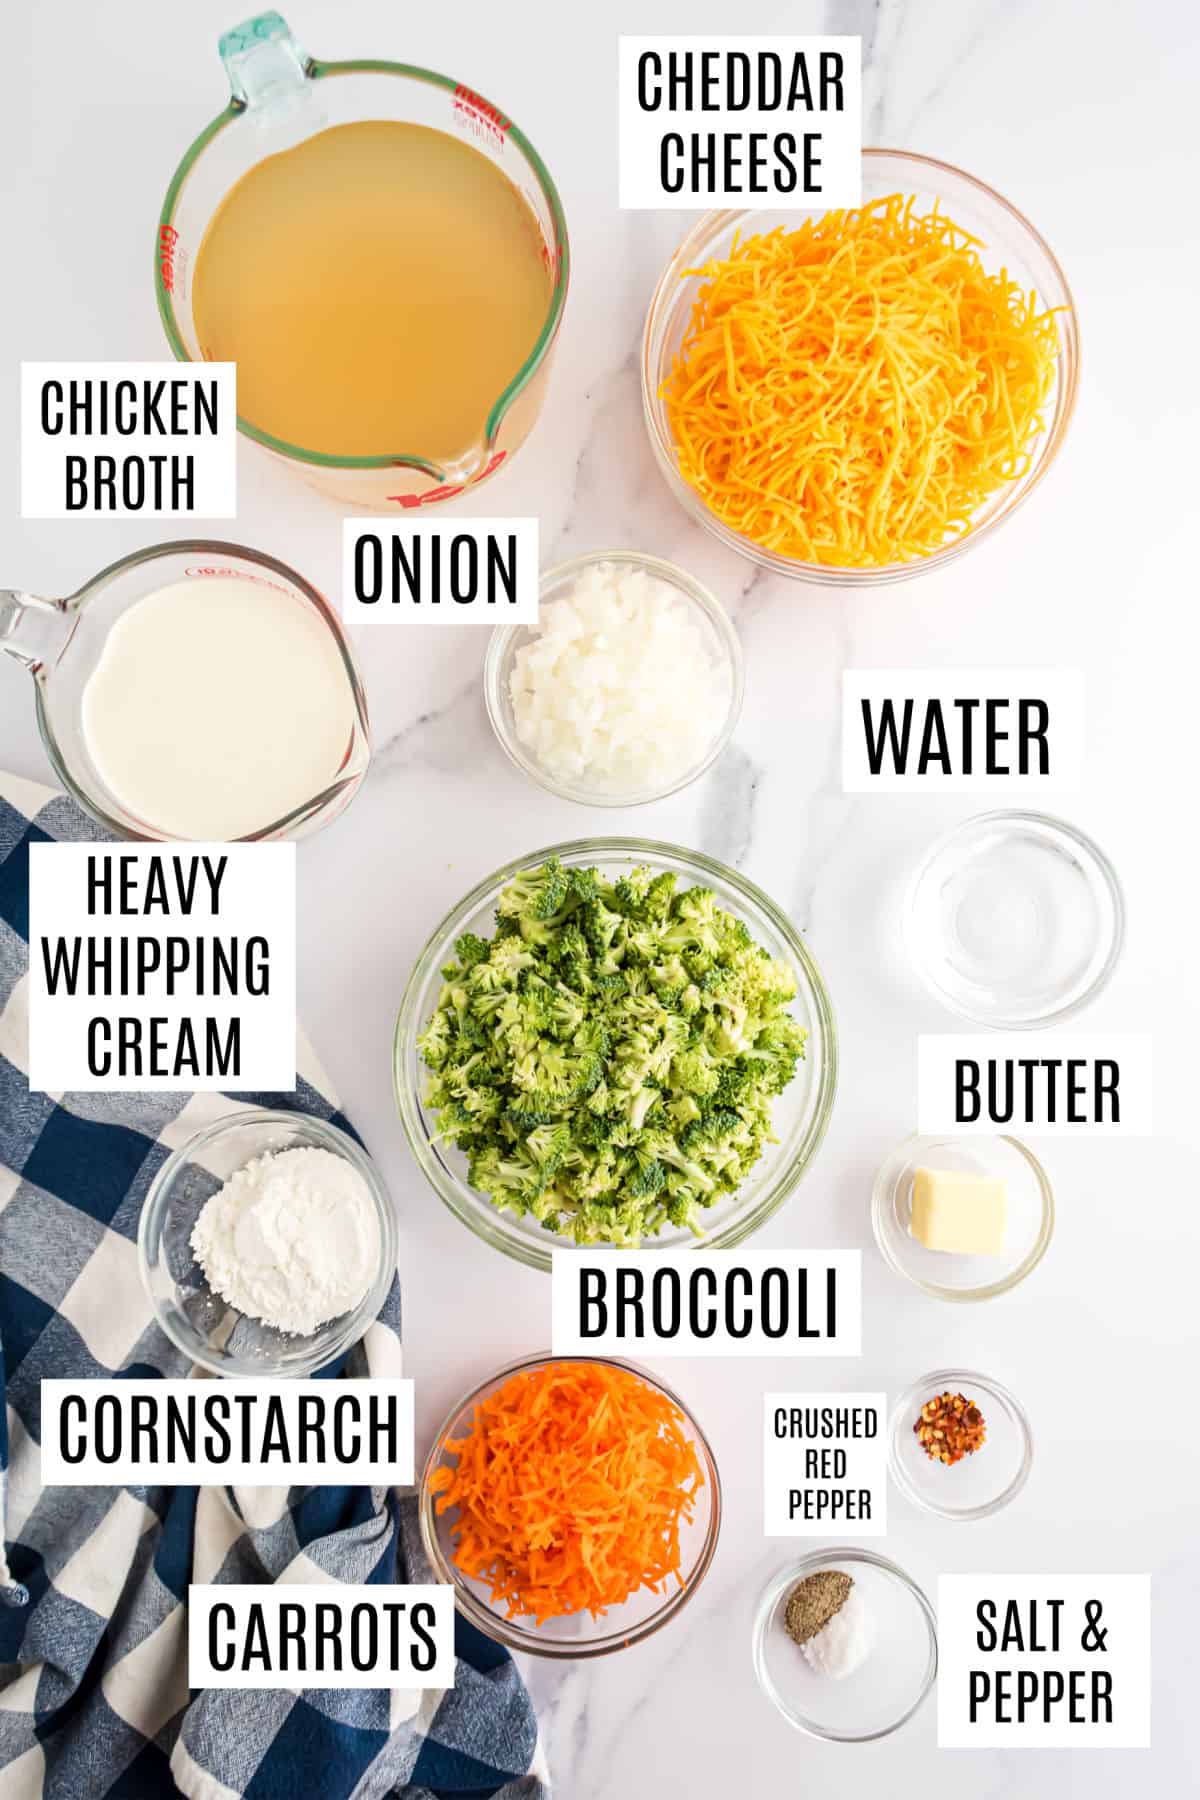 Ingredients needed to make broccoli cheese soup in the Instant Pot.